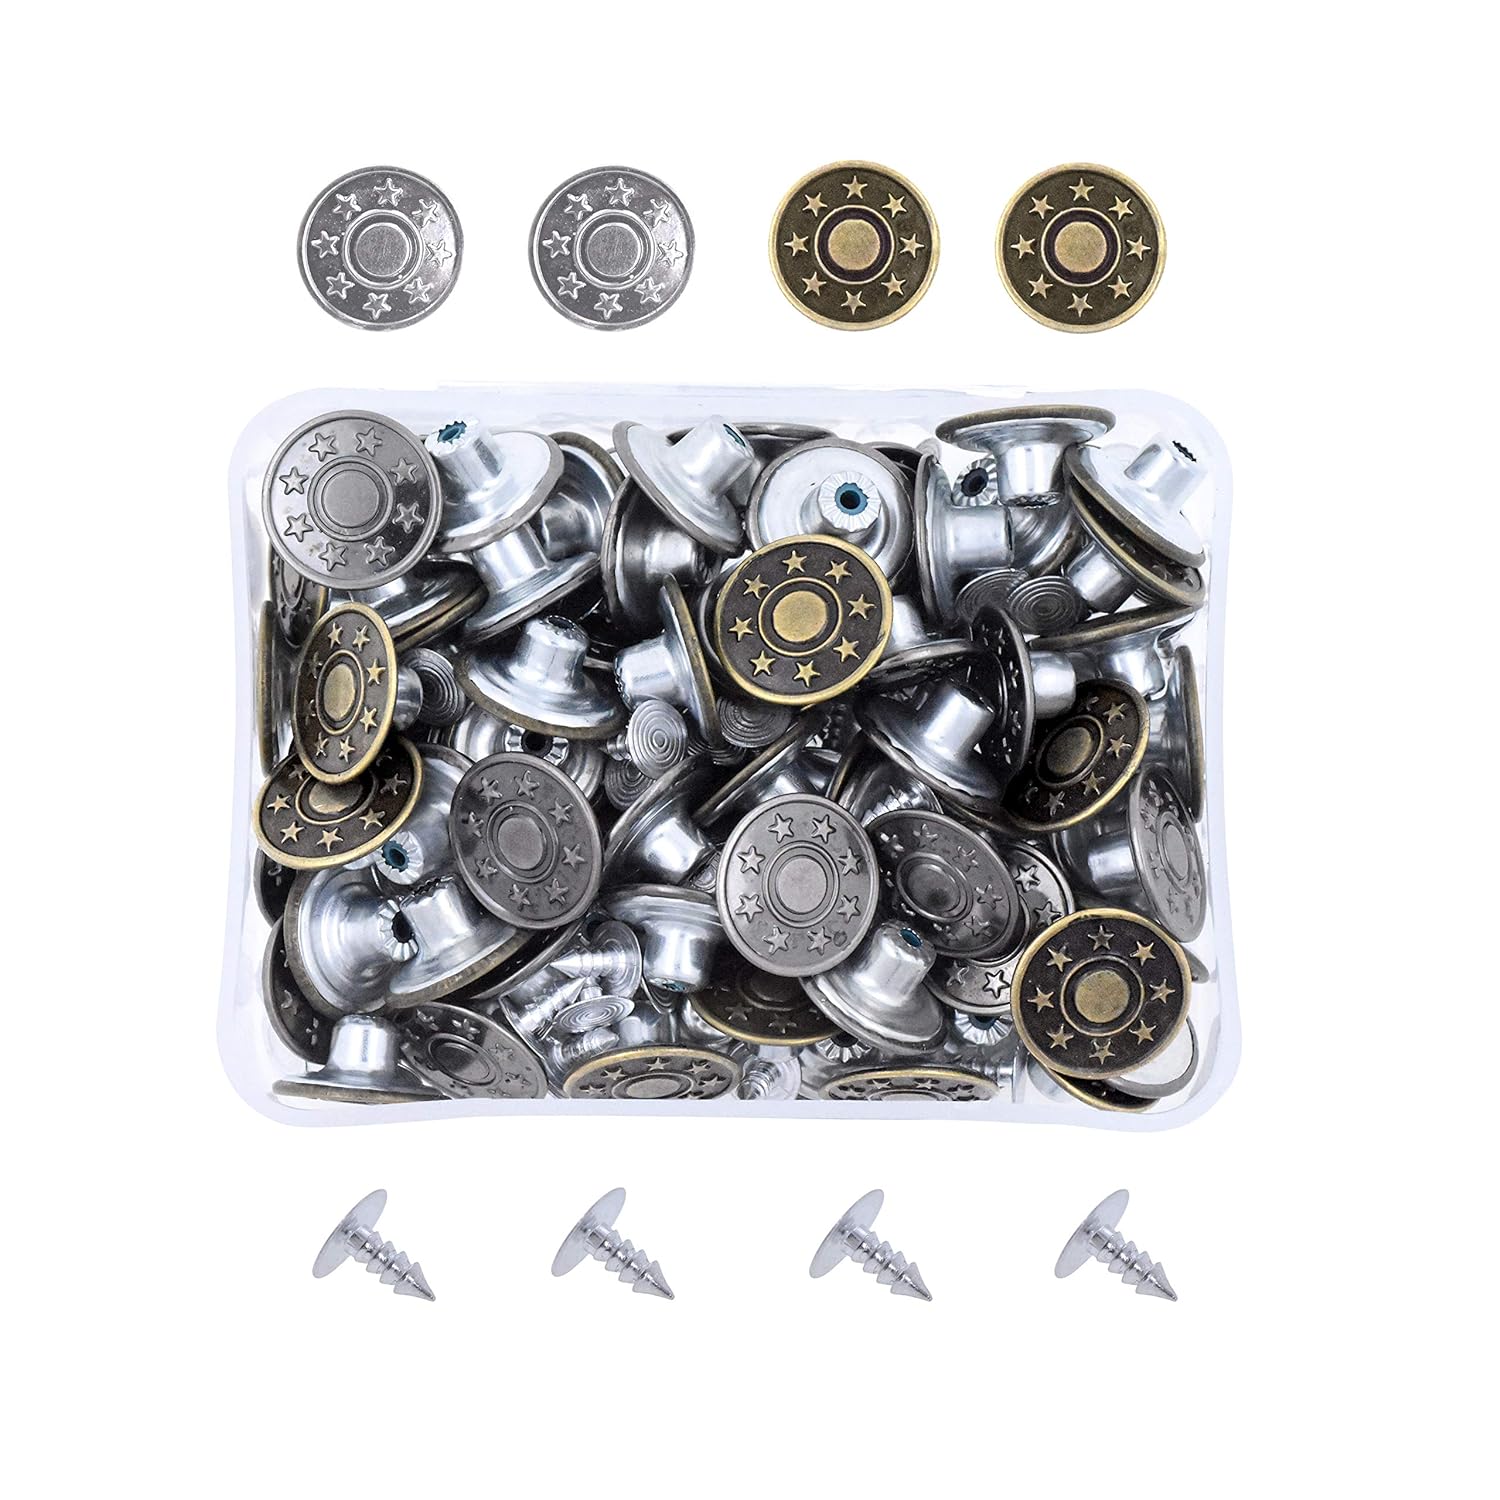 Great Choice Products Jean Button Replacement Tack Button With Rivet Kit For Pants Suspenders Jackets Shorts Overalls 17Mm 80 Sets Antique Brass…